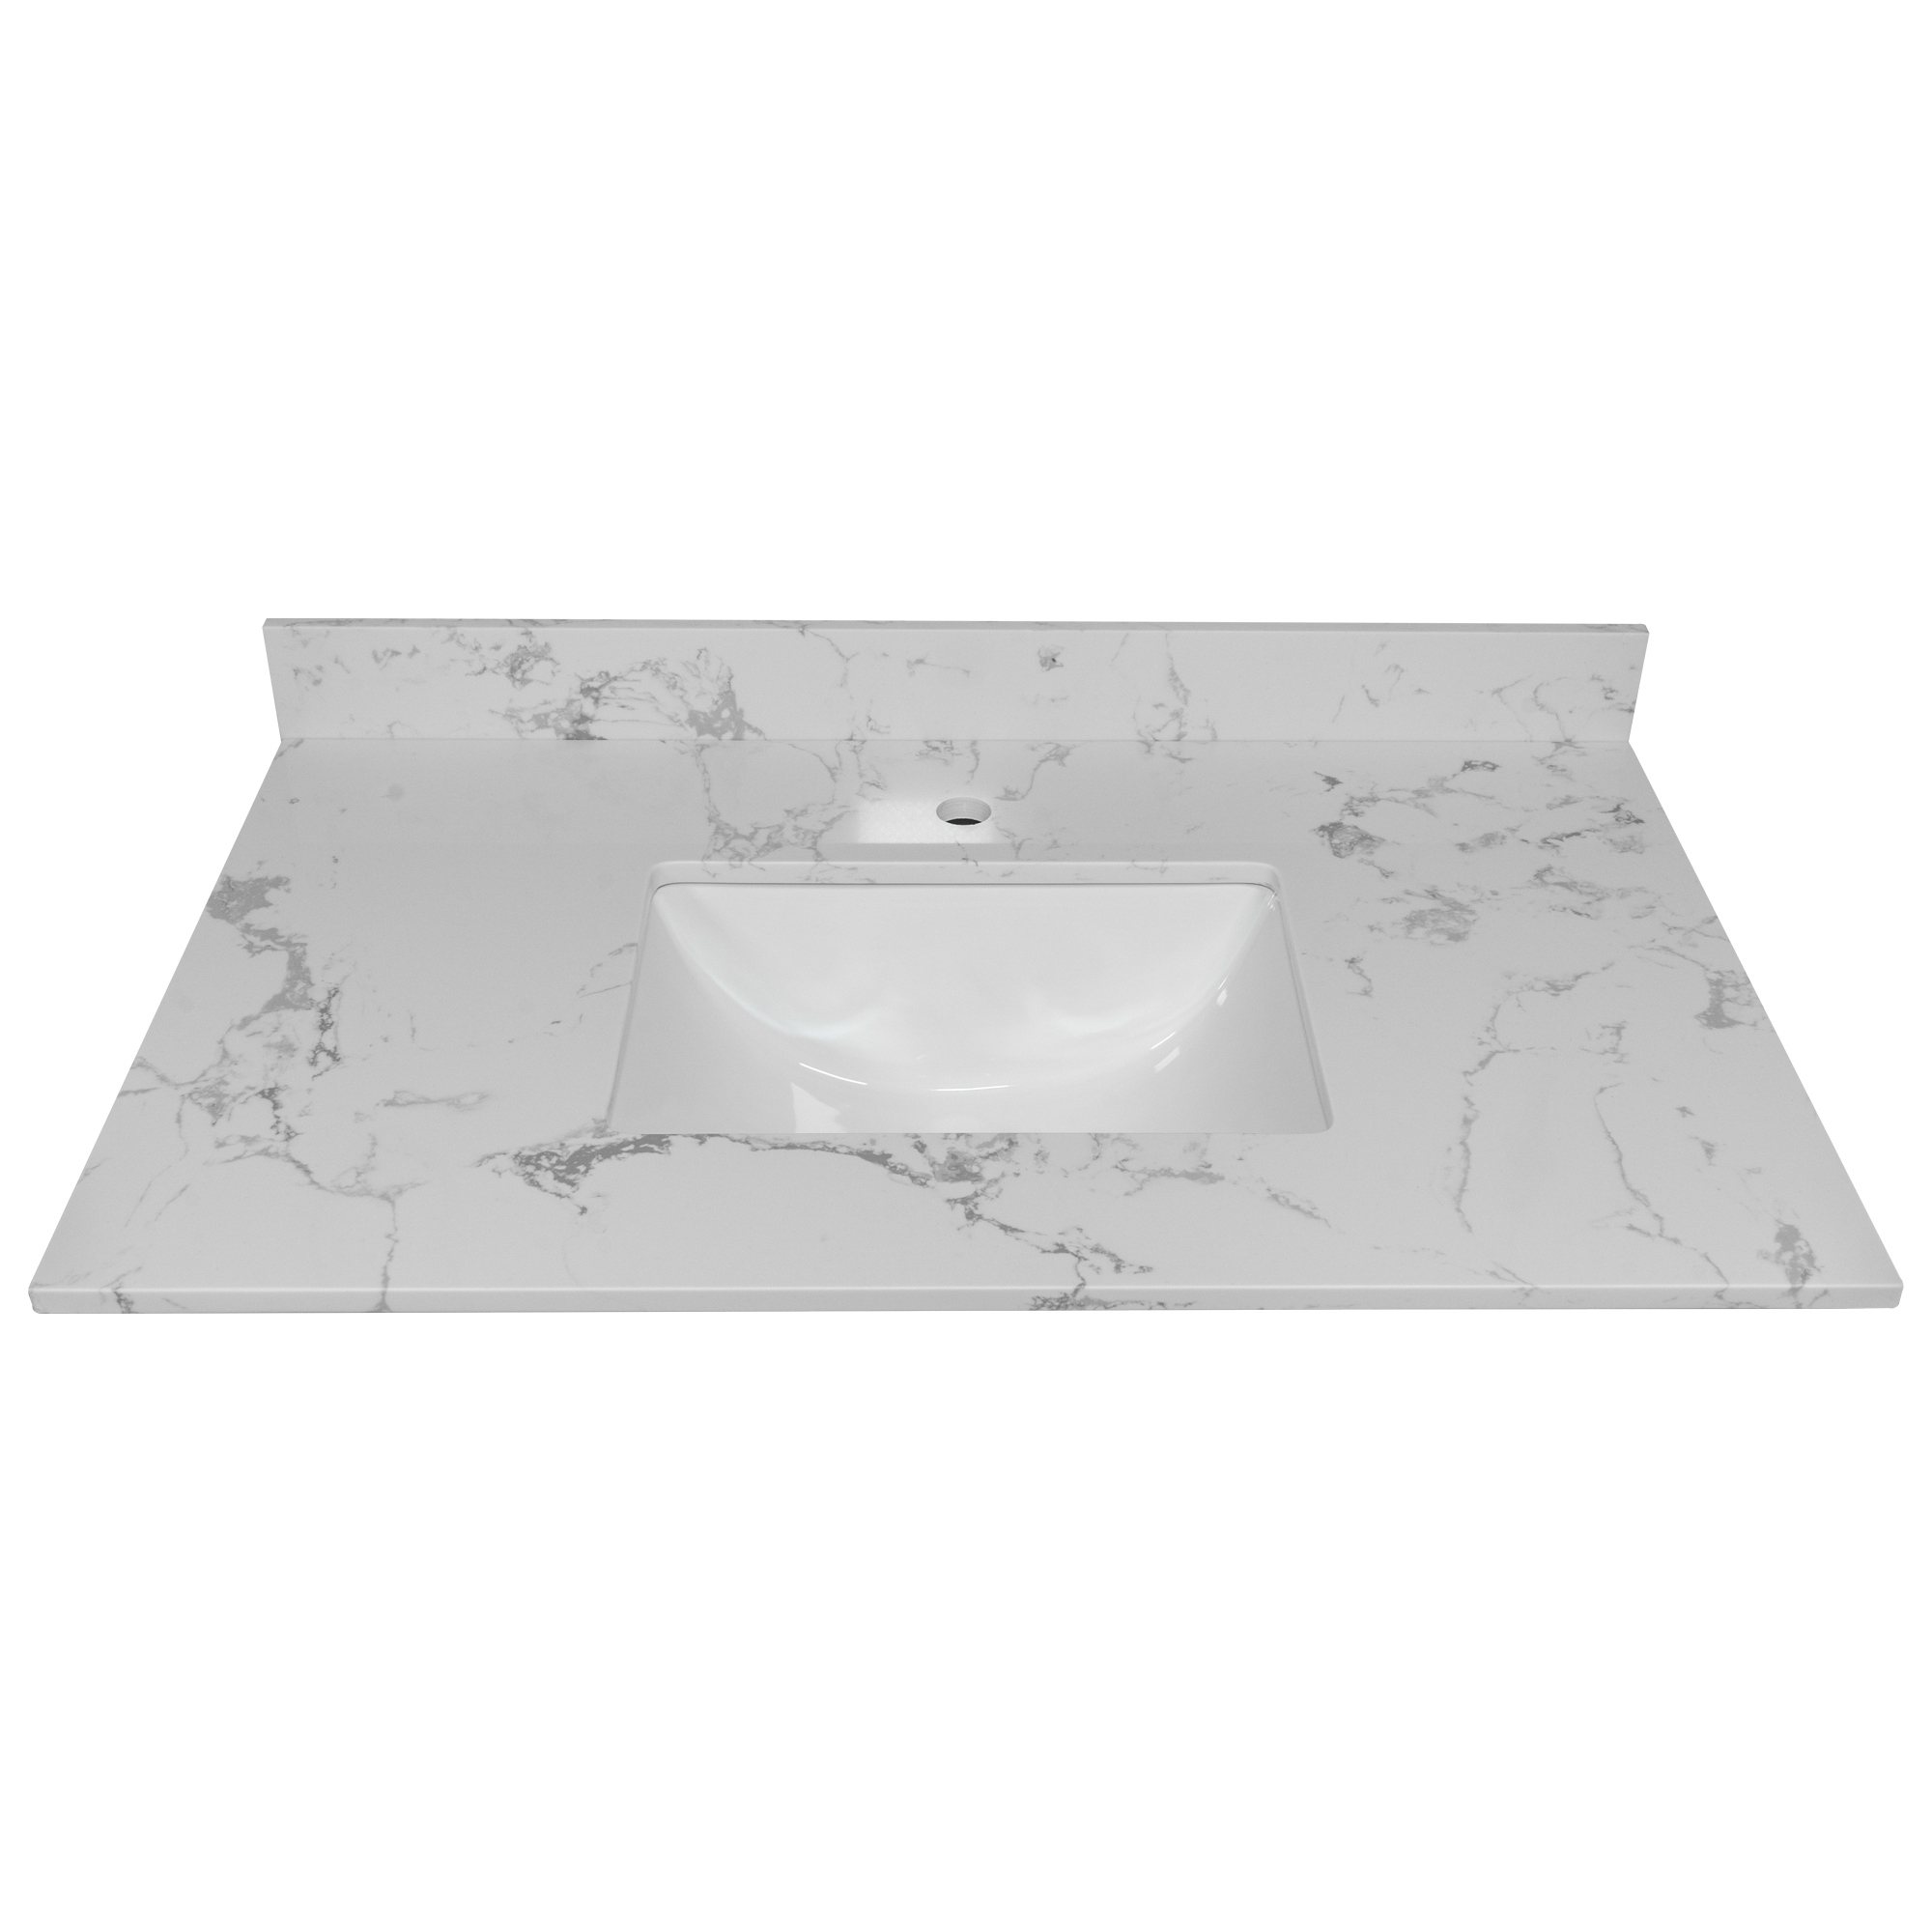 Montary 37inch bathroom vanity top stone carrara white new style tops with rectangle undermount ceramic sink and single faucet hole-Boyel Living